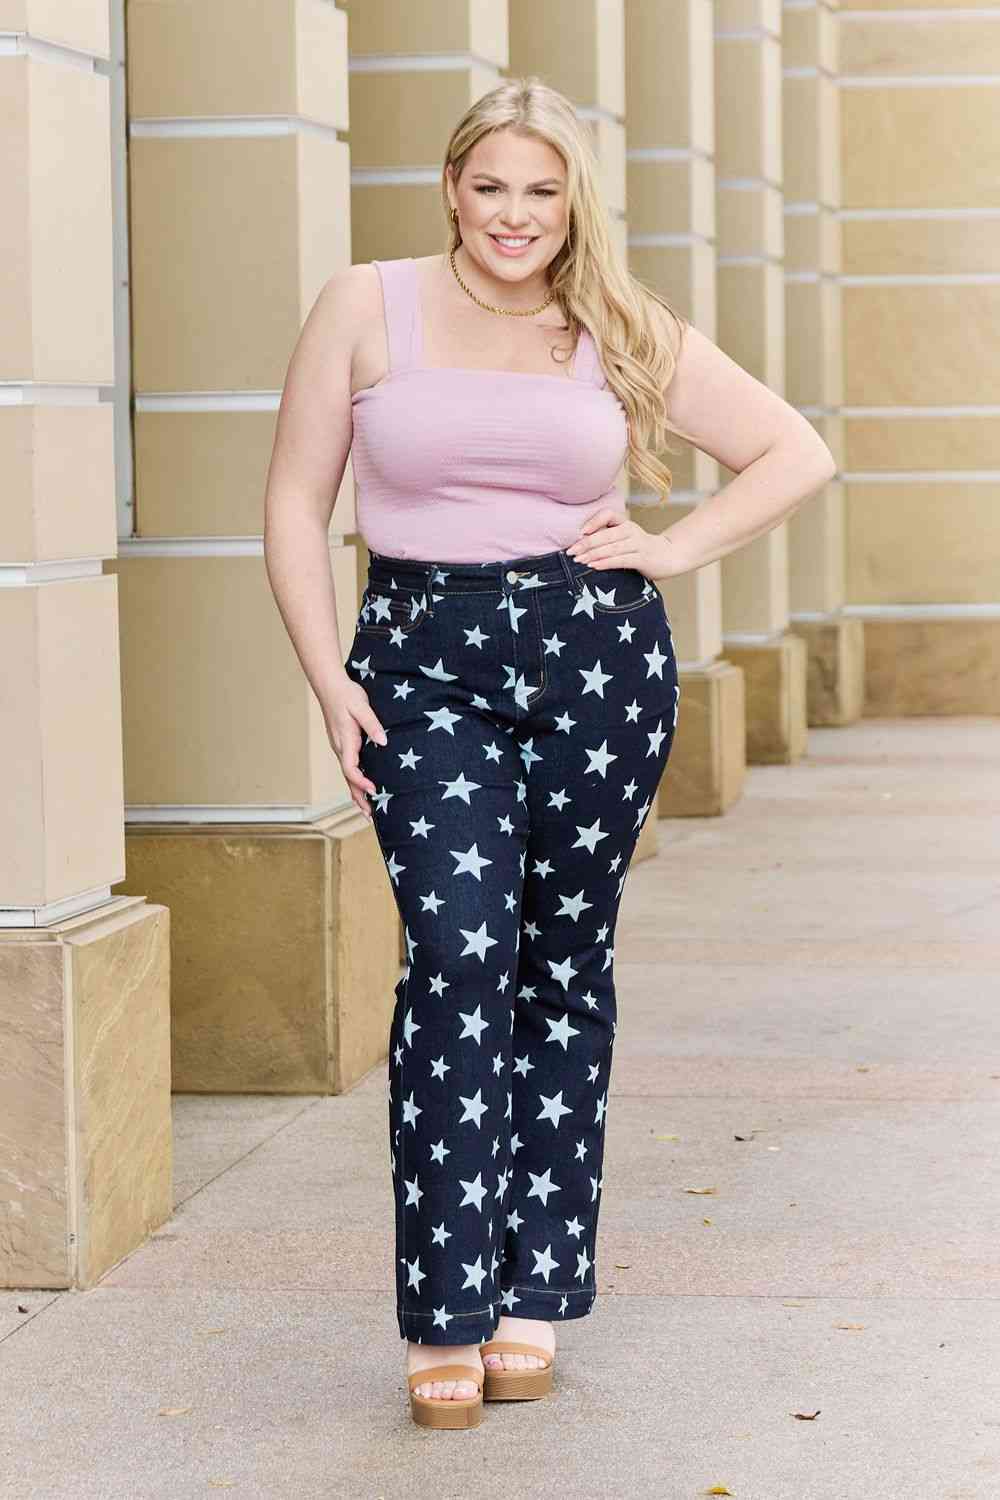 Buy Judy Blue Janelle Star Print Flare Jeans On Sale - Daily Fashion